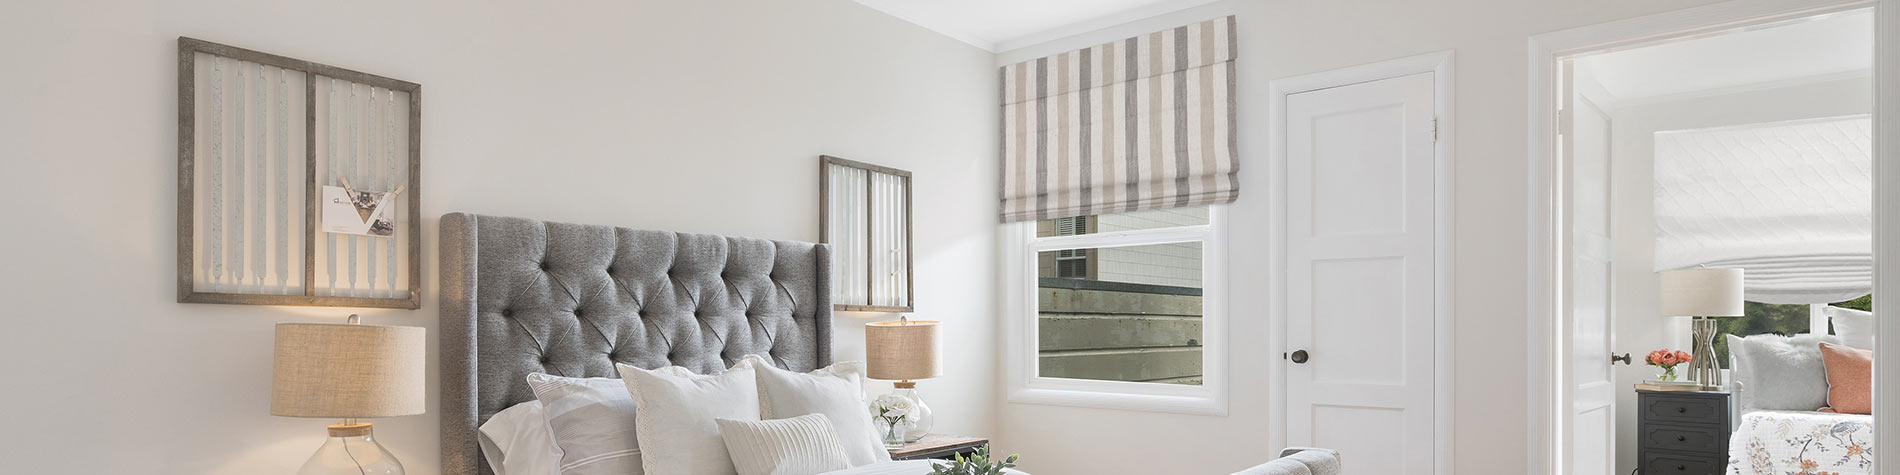 bedroom window treatments for privacy control